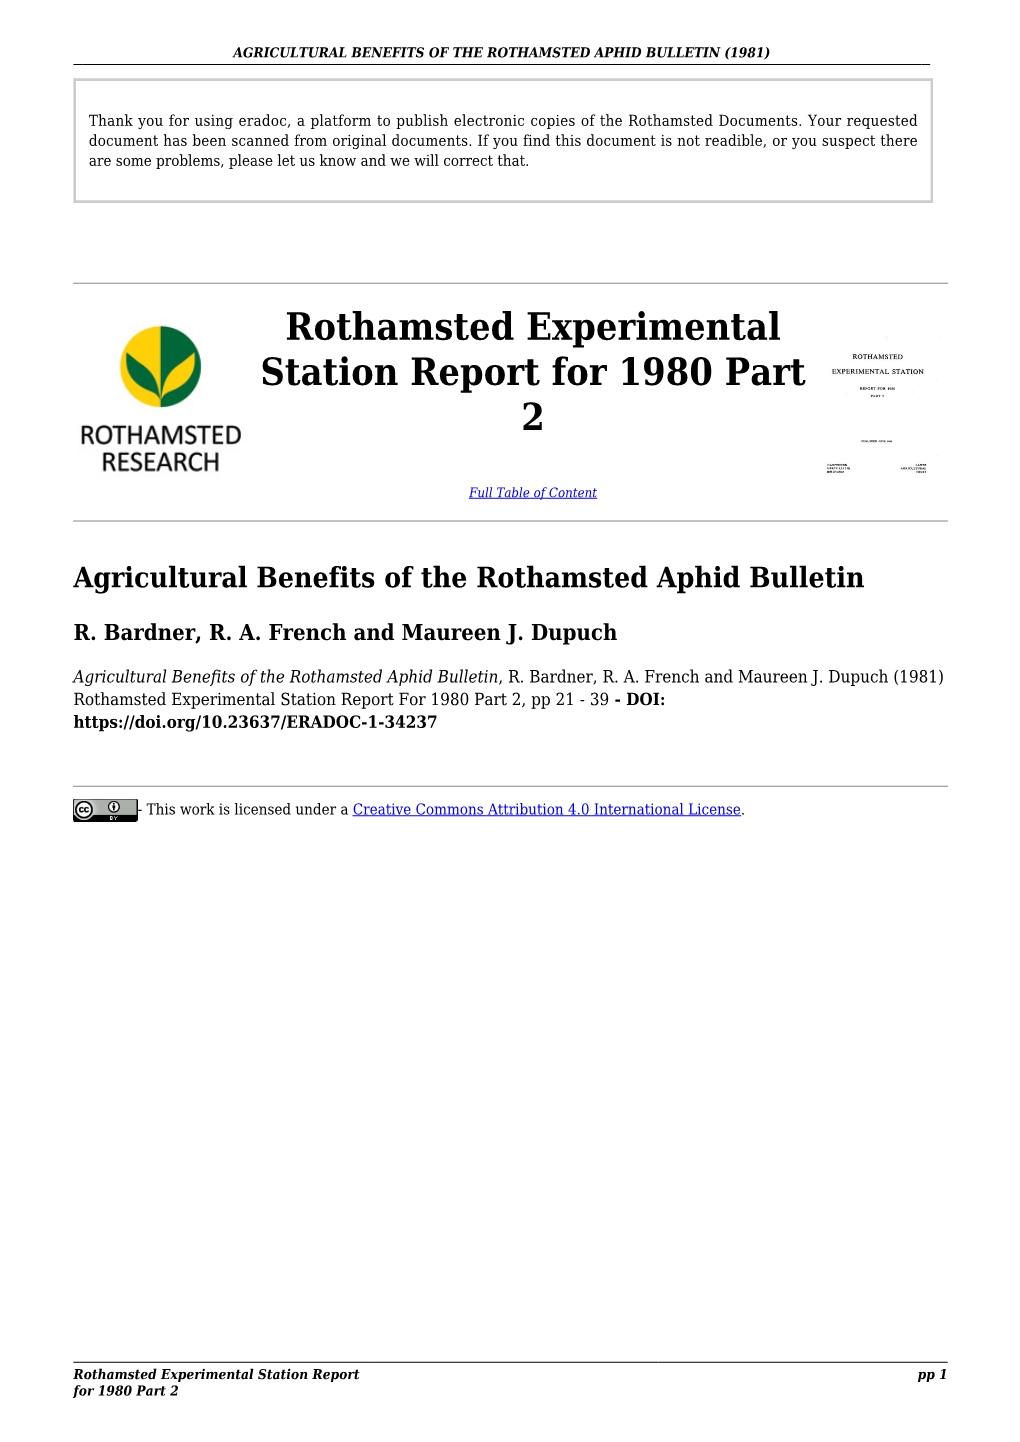 Rothamsted Experimental Station Report for 1980 Part 2